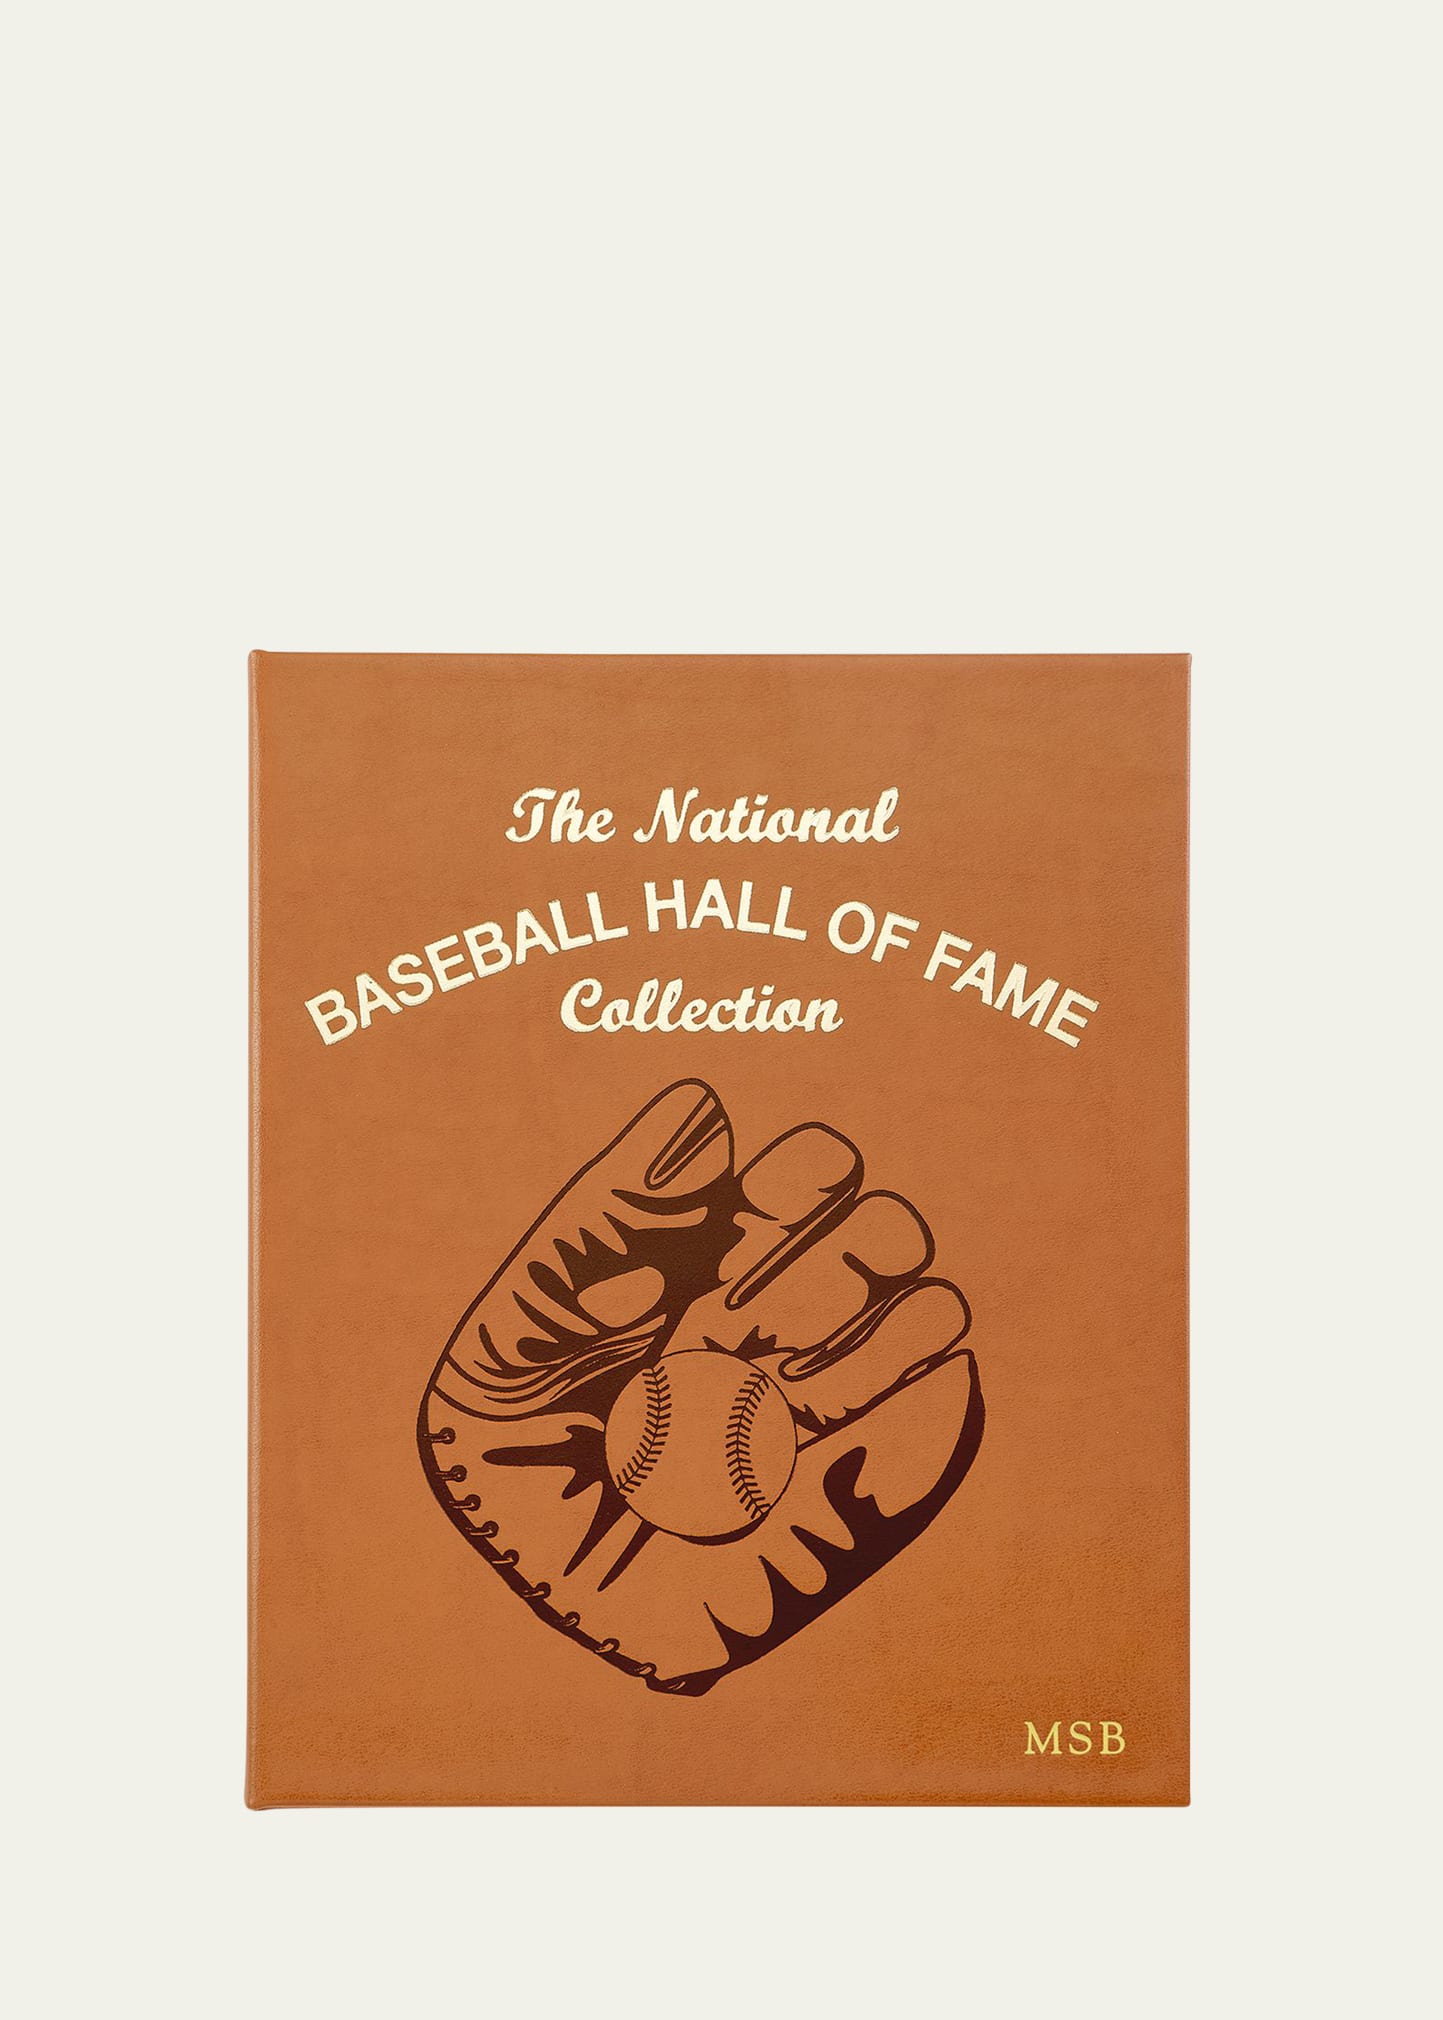 "The National Baseball Hall of Fame Collection" Book by James Buckley